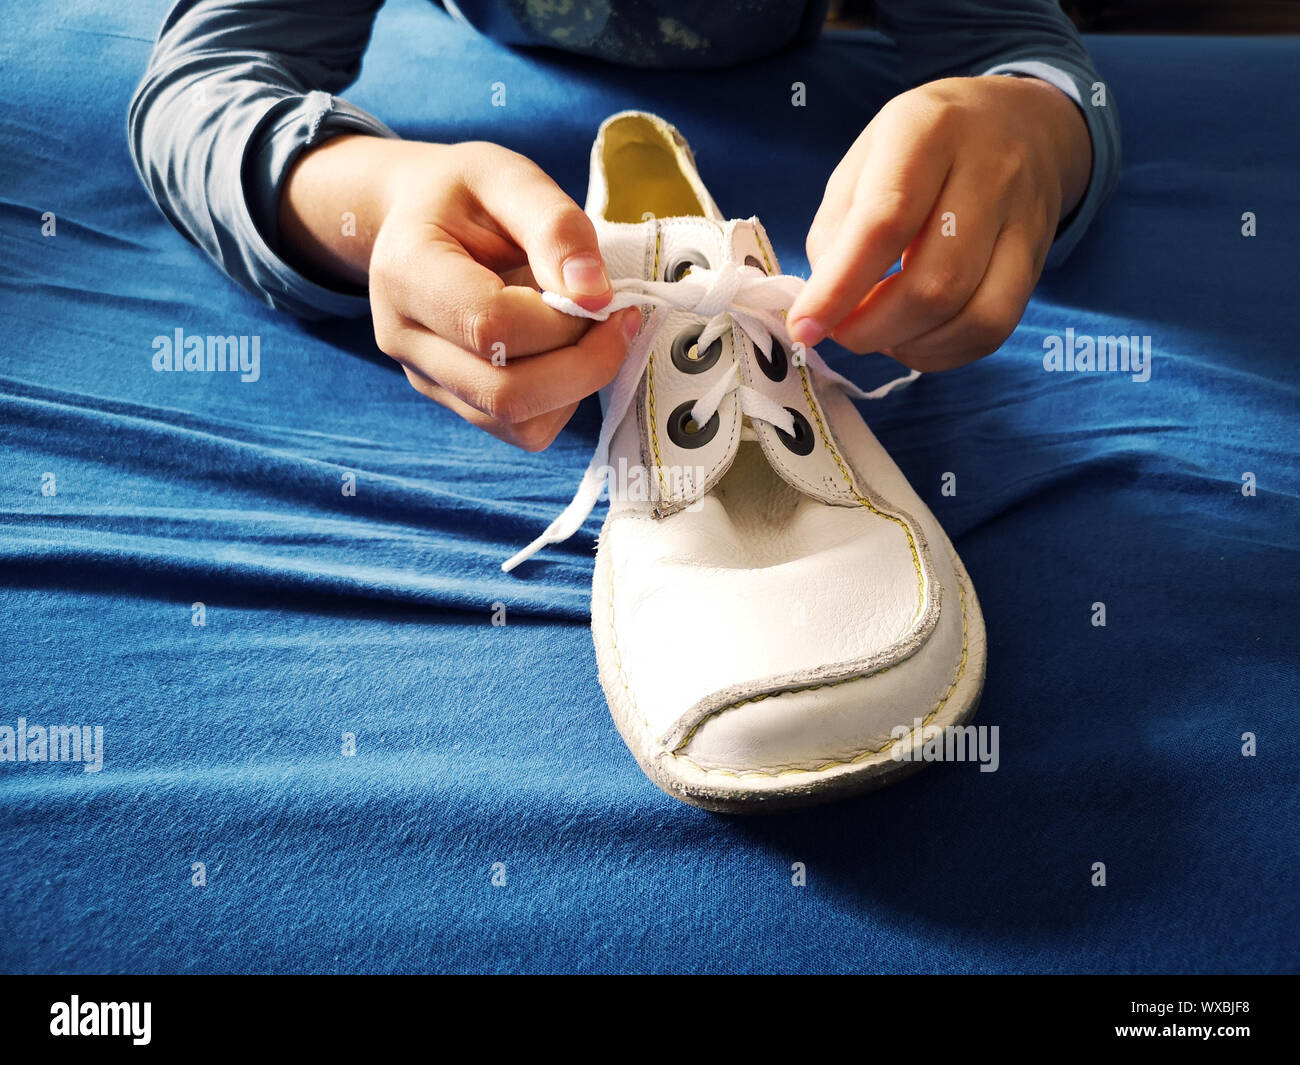 learning to tie shoelaces